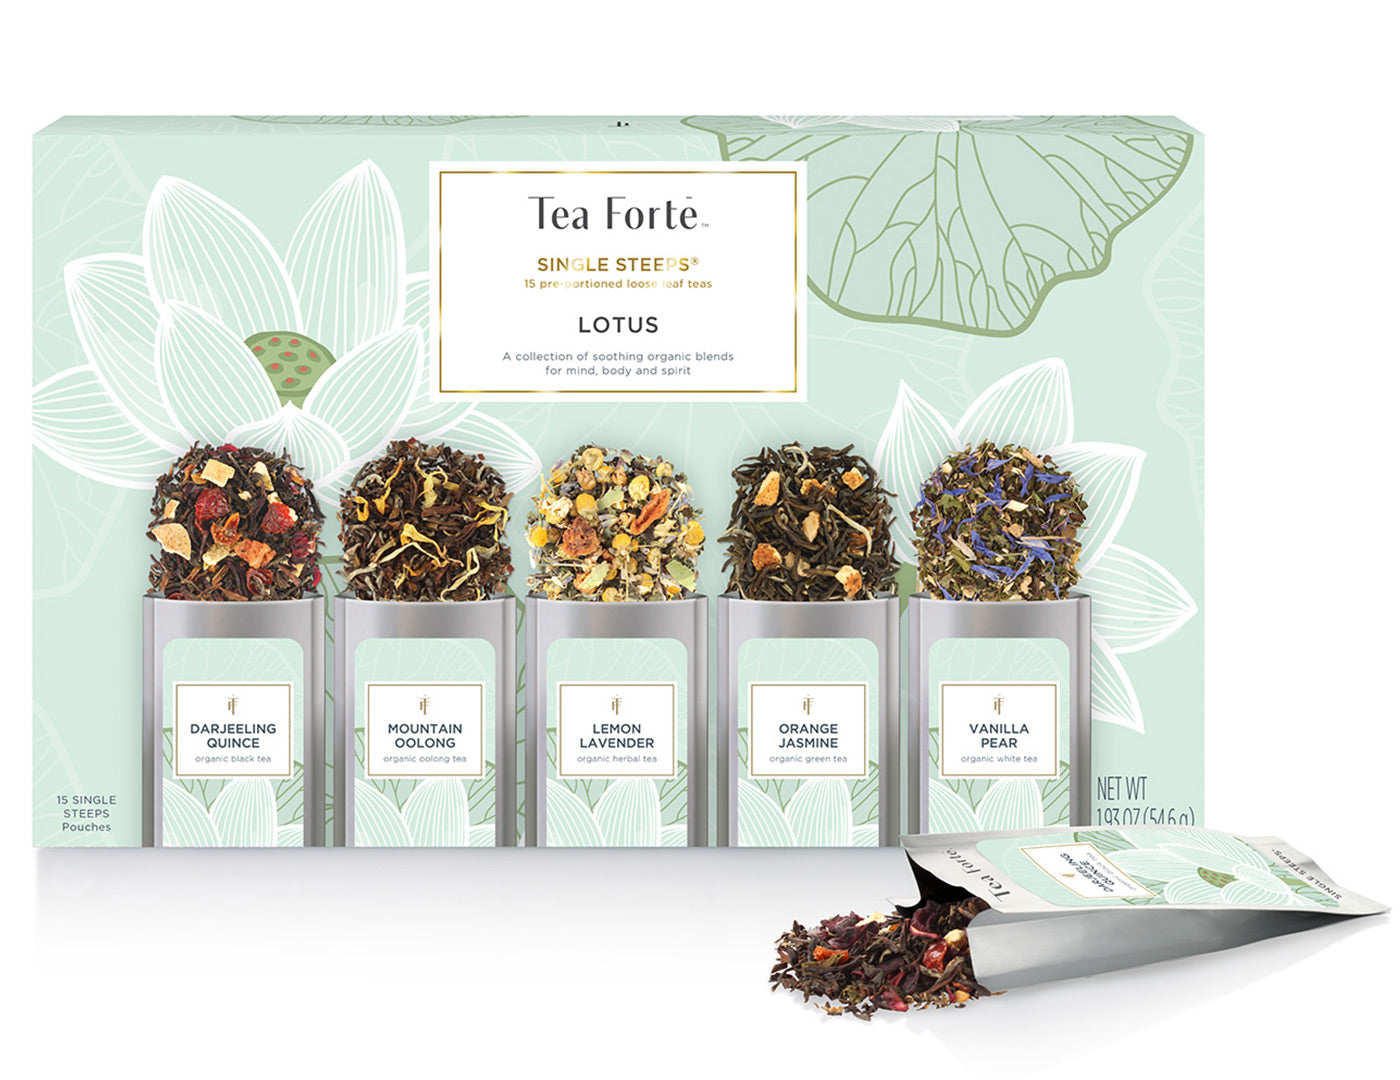 Lotus Single Steeps Sampler of 15 loose tea pouches, closed with pouch open in front